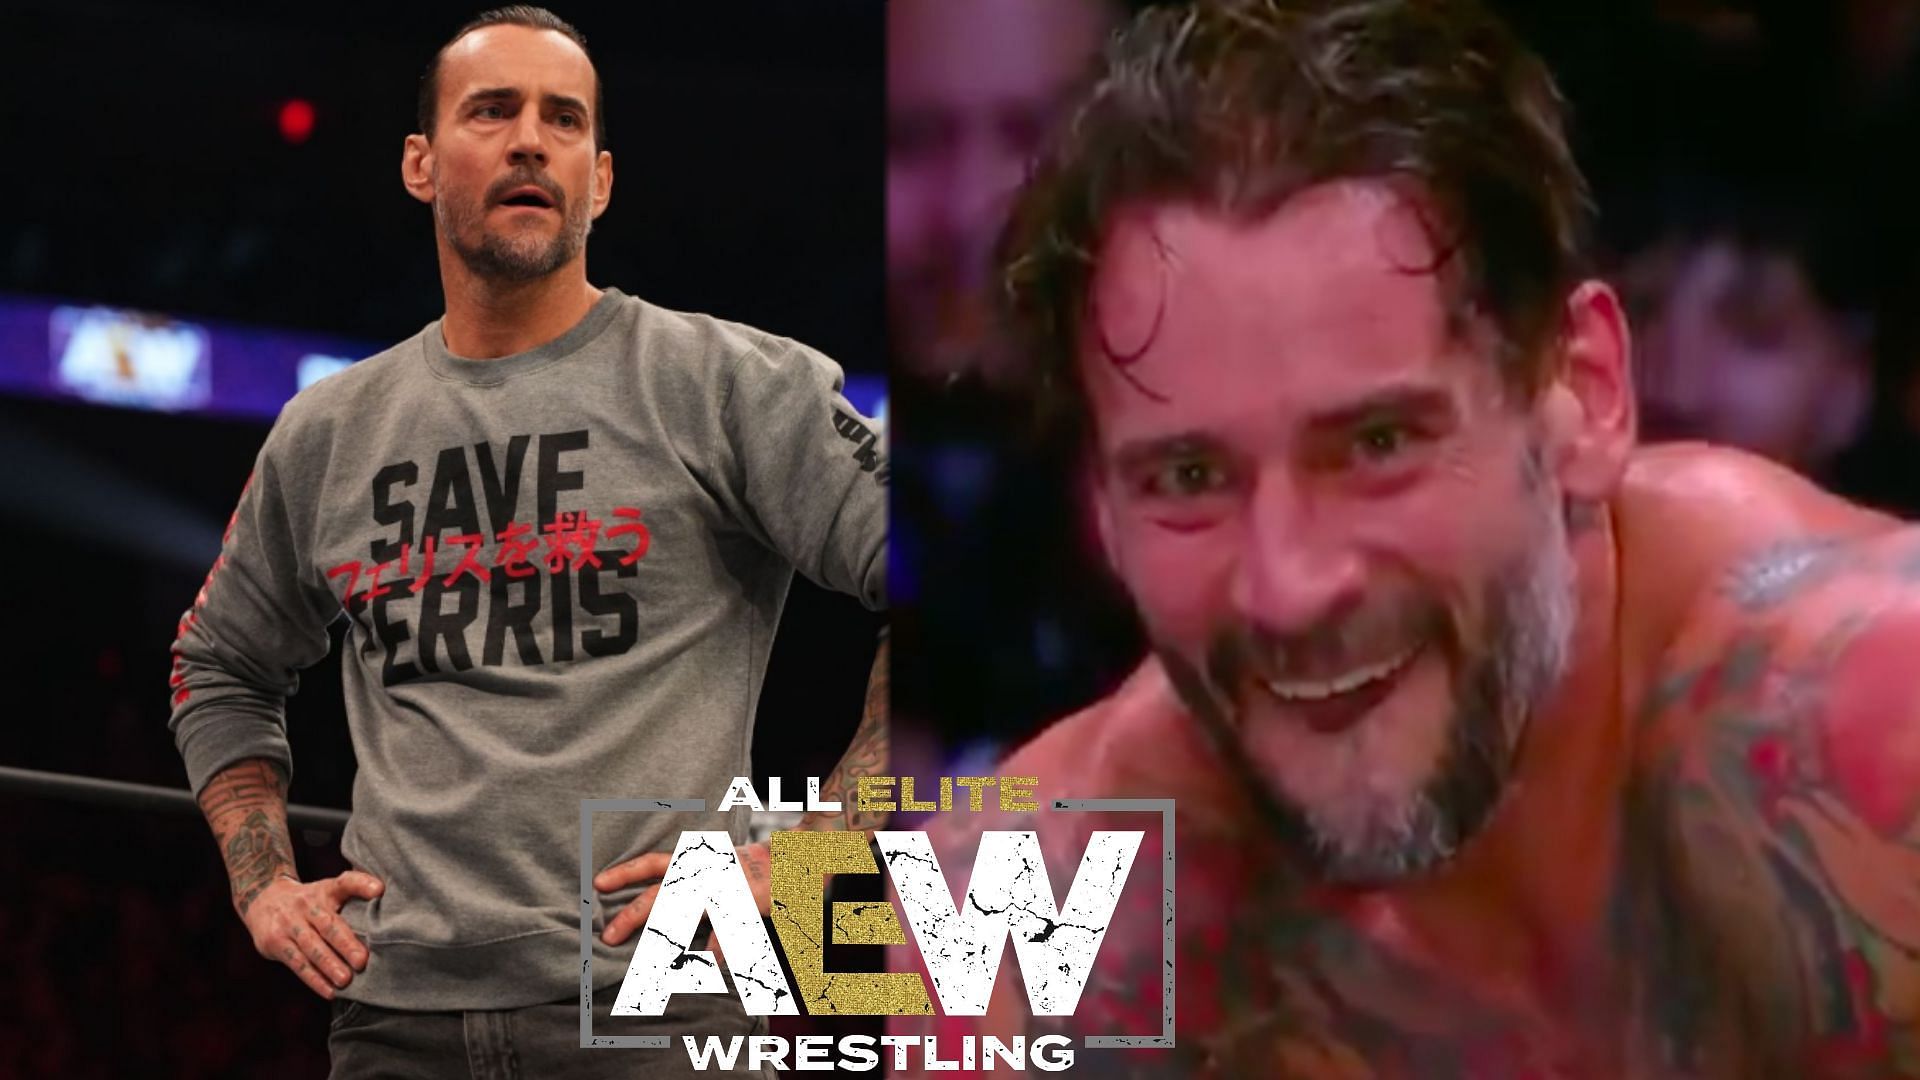 Punk has been with AEW since his debut in 2021.